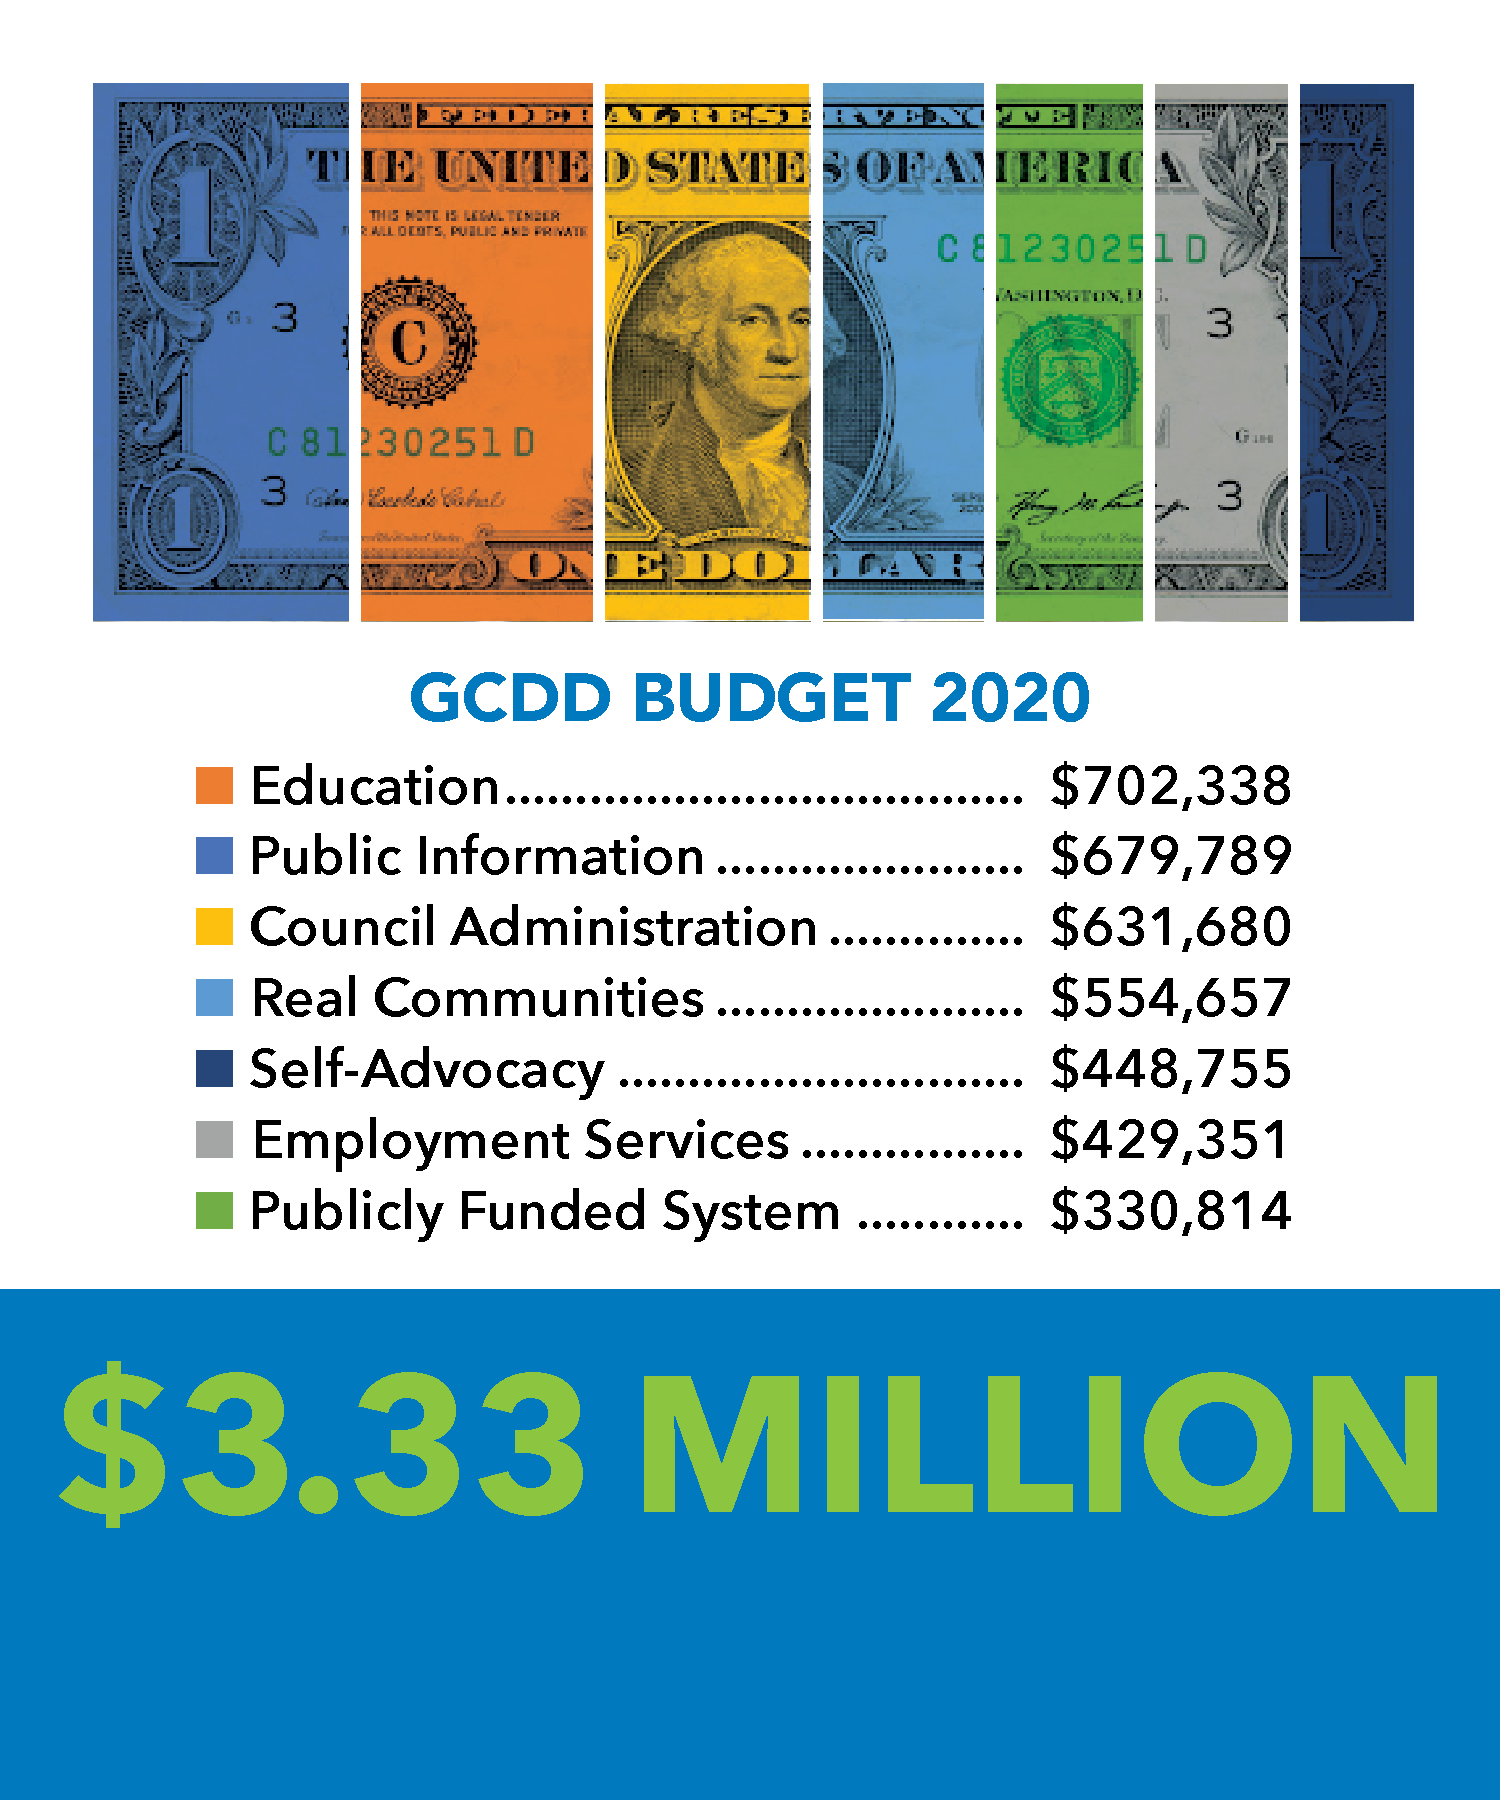 Amount per year GCDD spends to support people with developmental disabilities in Georgia  (Period covered: Oct 1, 2019 - Sep 30, 2020)